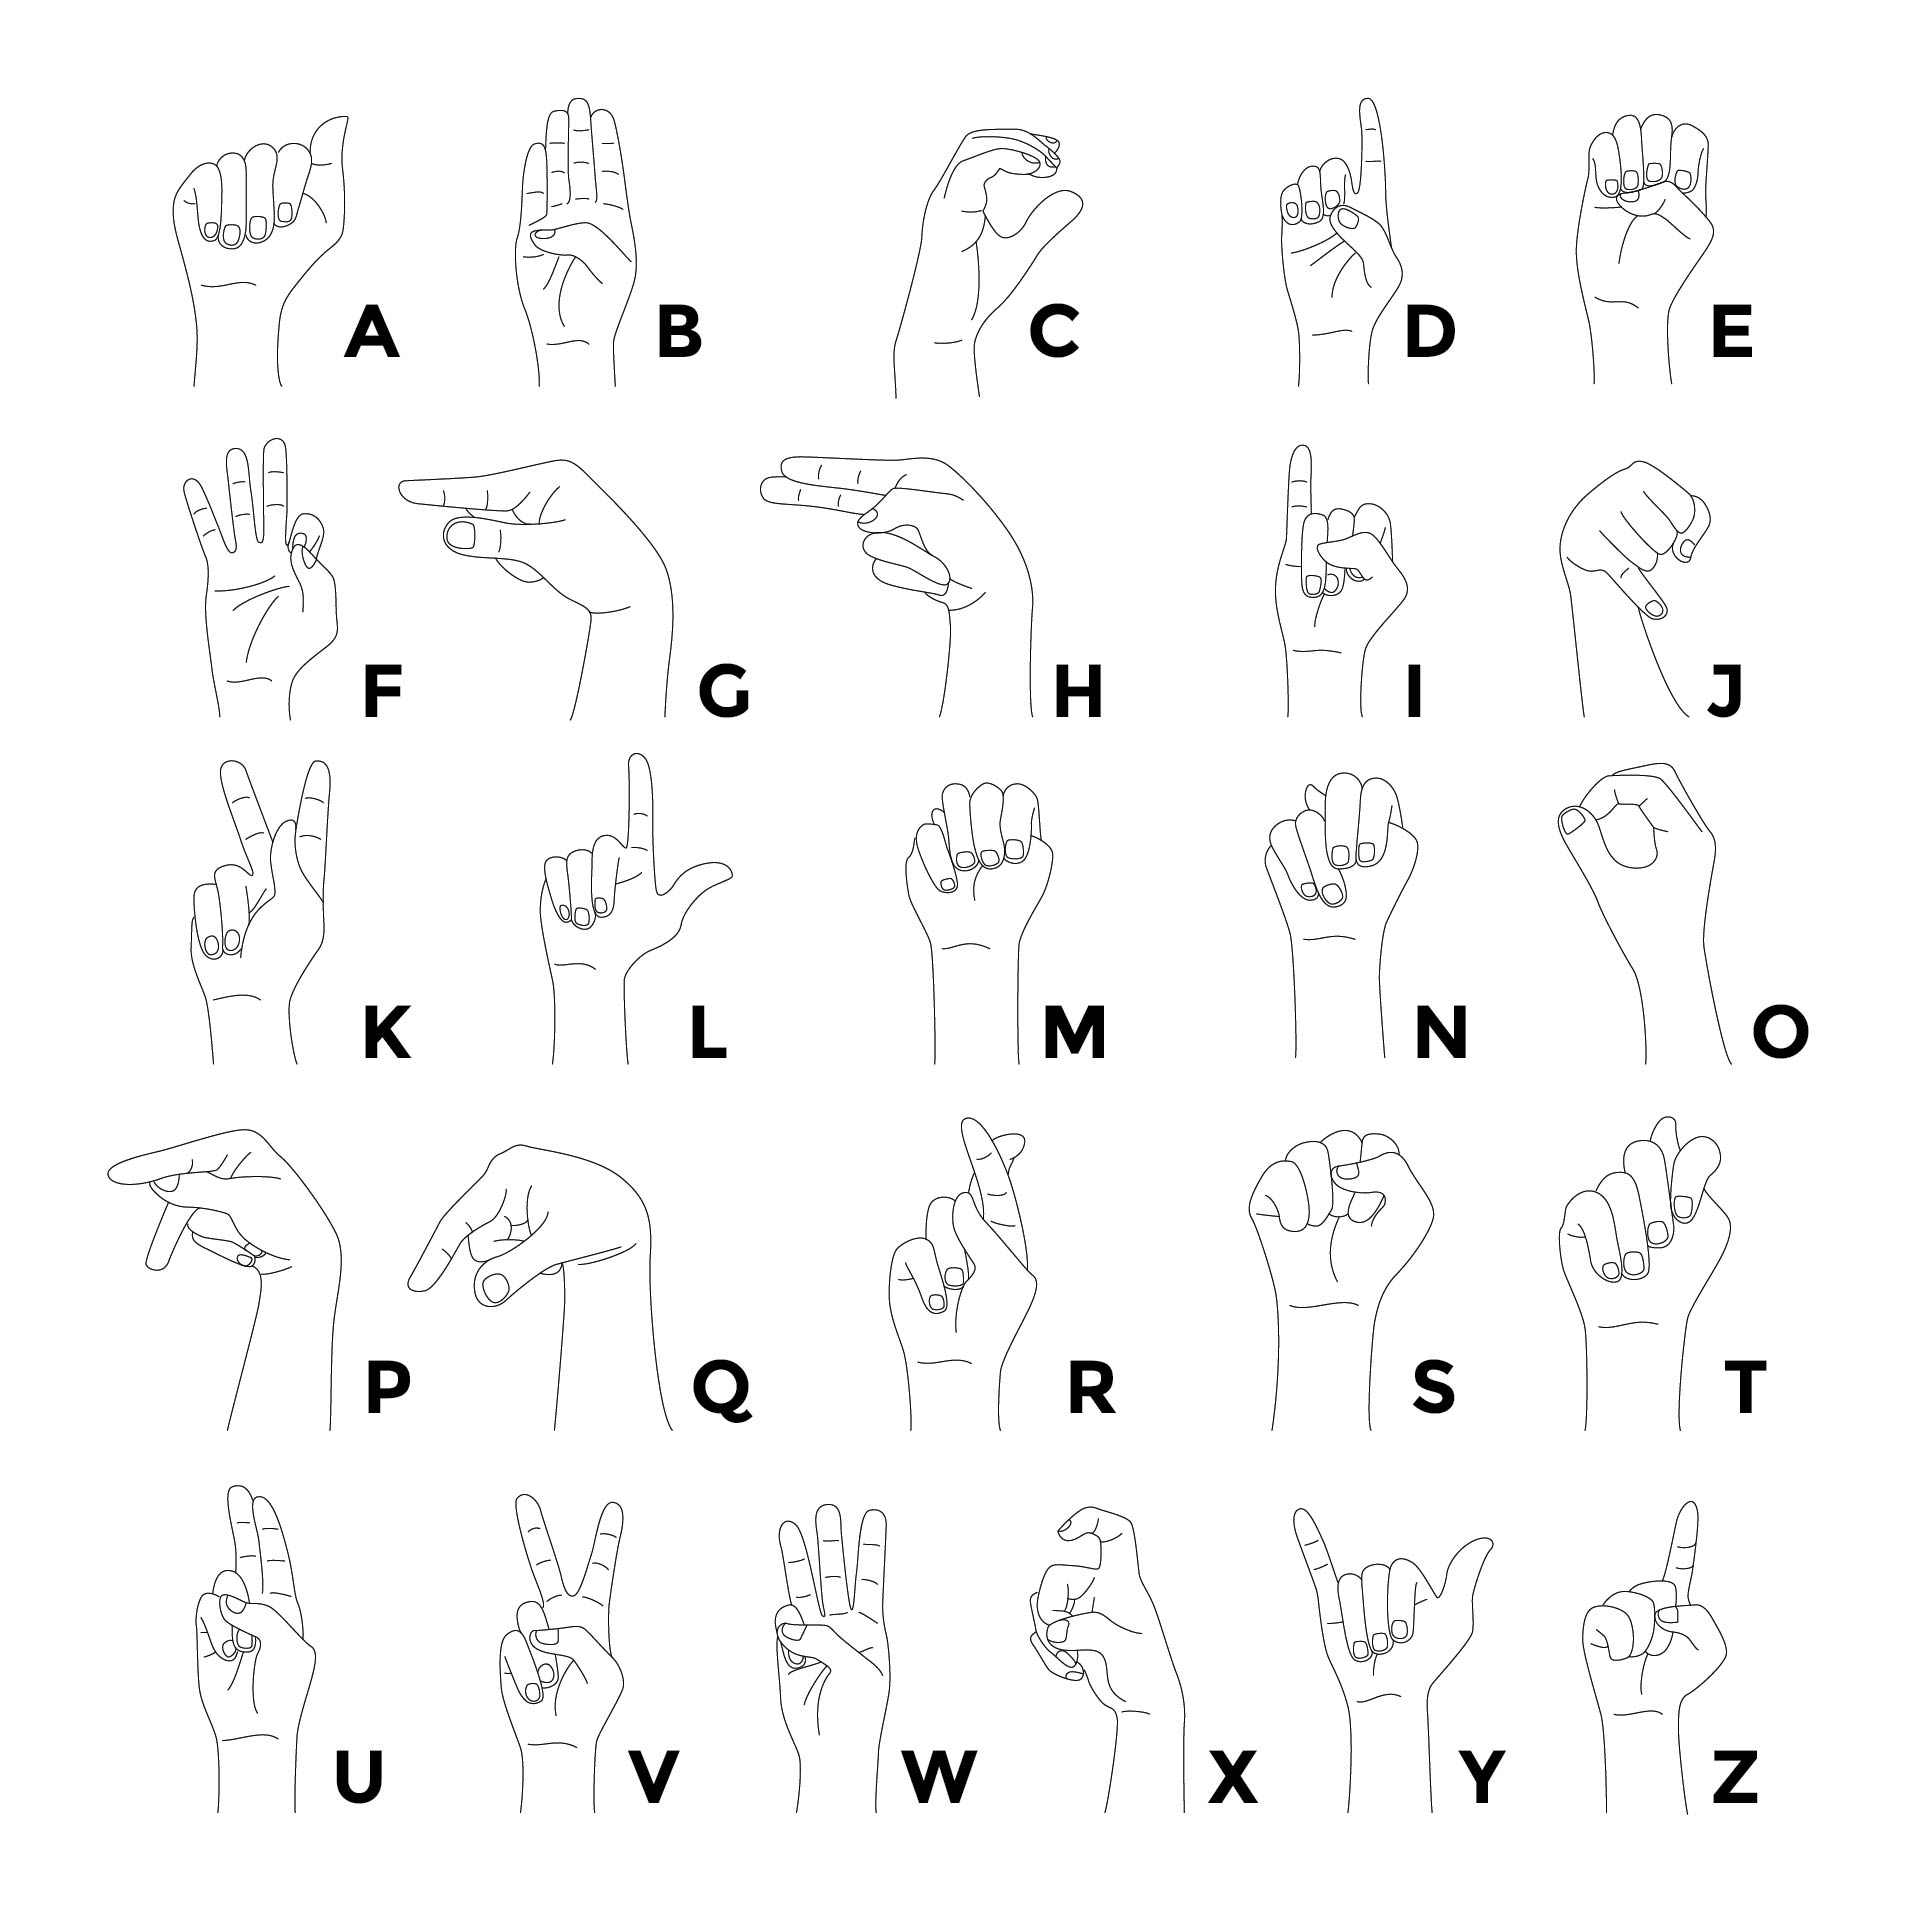 sign-language-words-and-phrases-worksheets-images